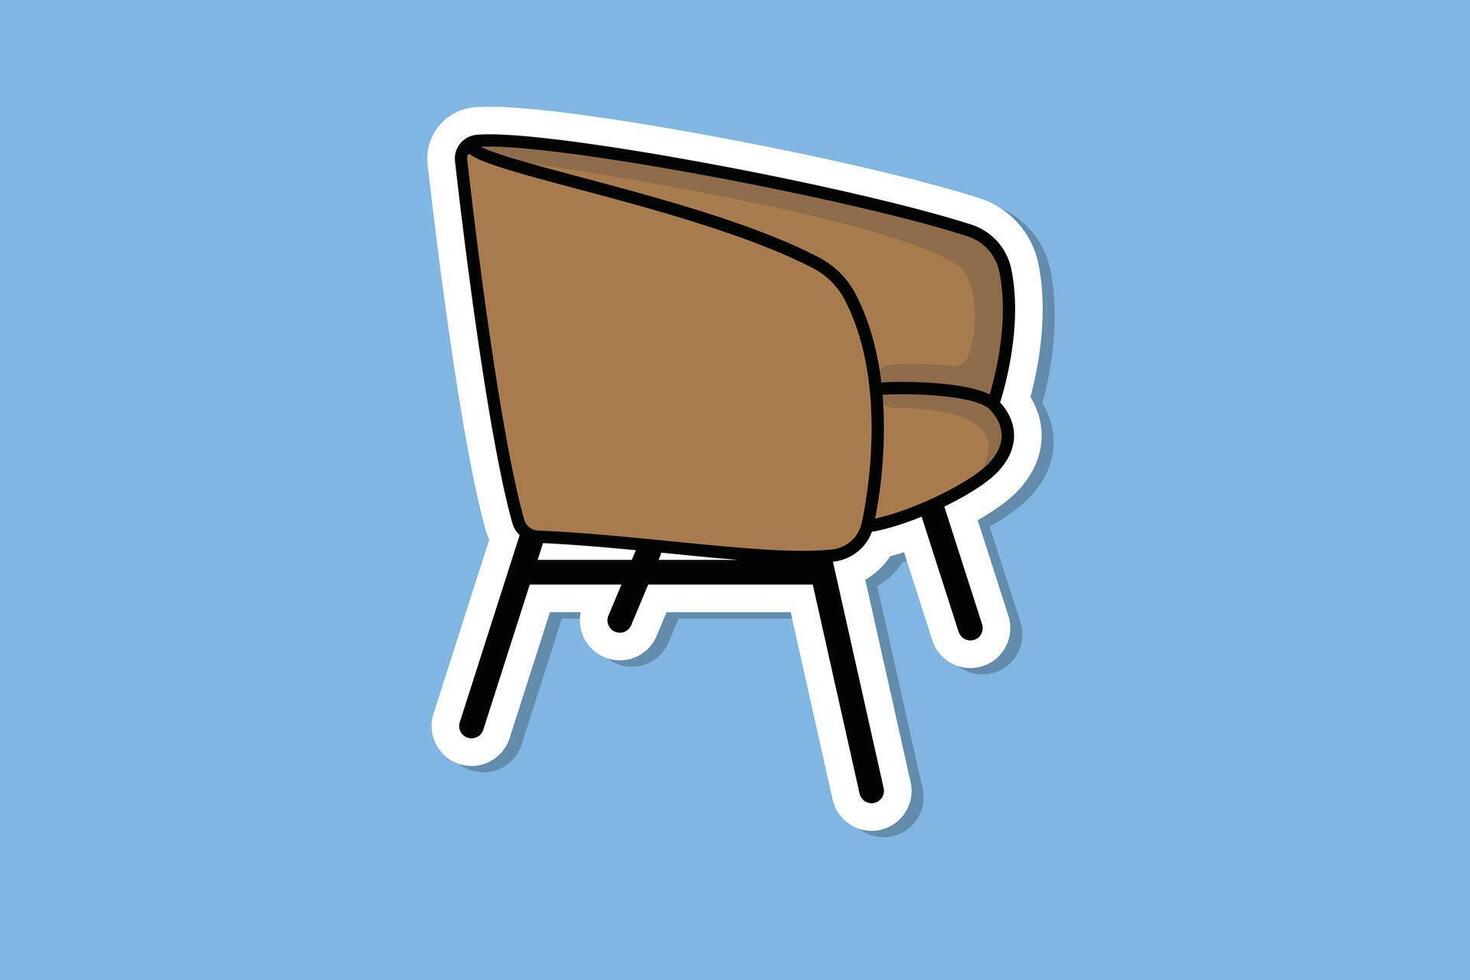 Comfortable Office and House Sofa Chair Sticker vector illustration. Interior indoor object icon concept. Furniture for the home and office decoration sticker design with shadow.